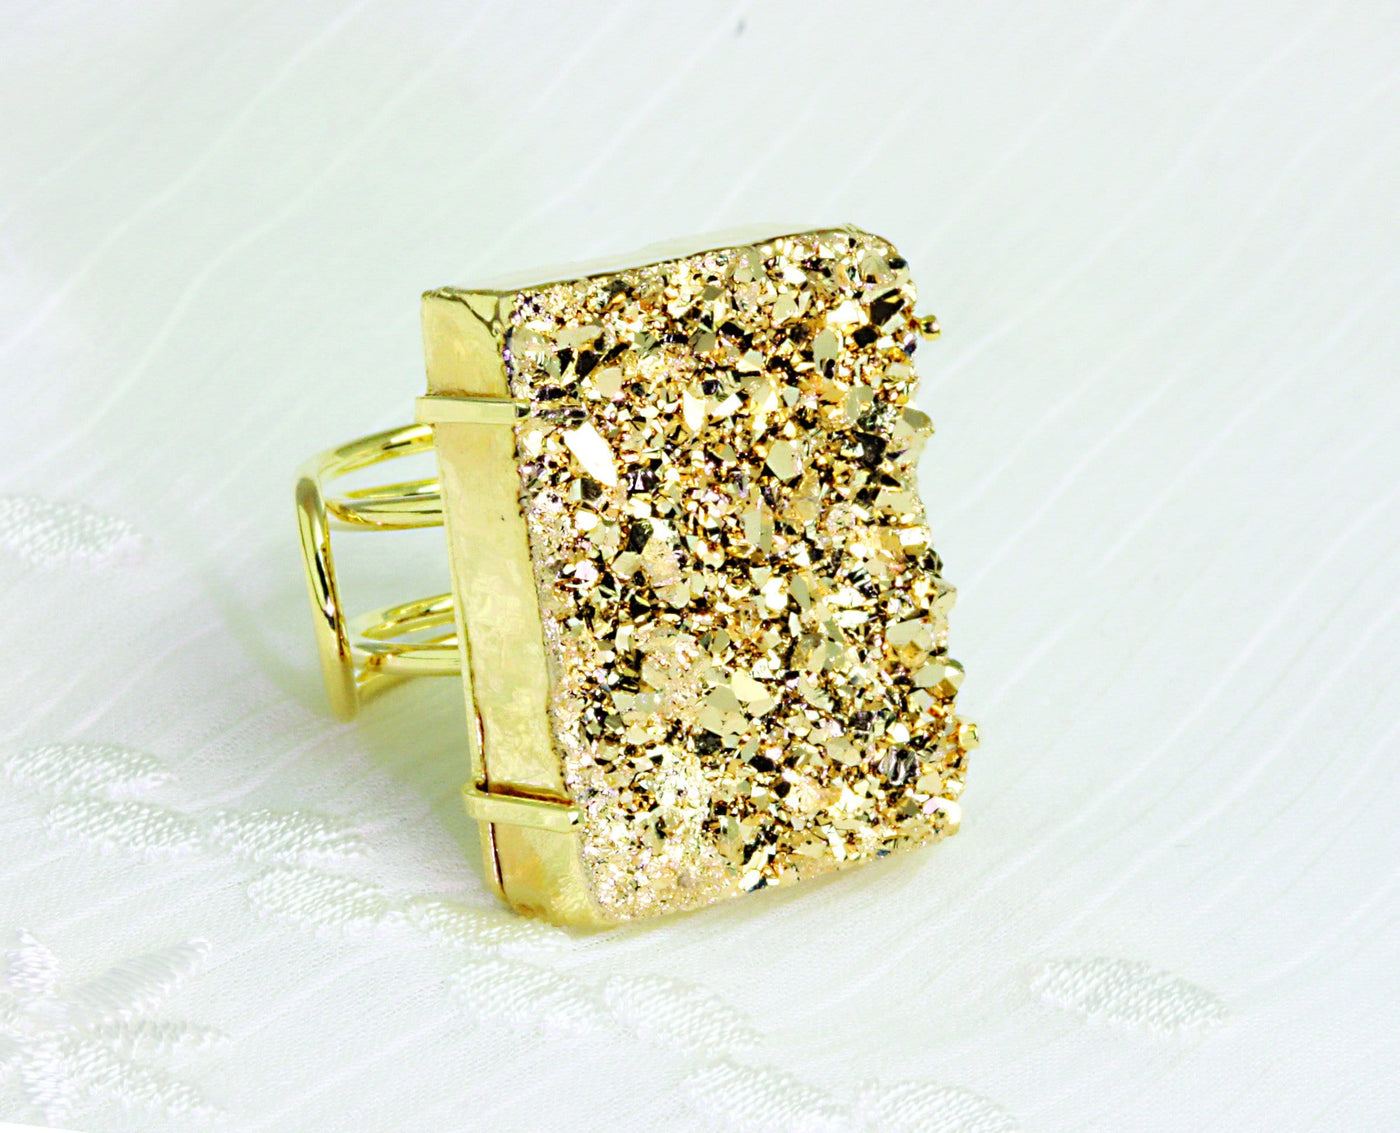 mystic druzy adjustable ring available in gold